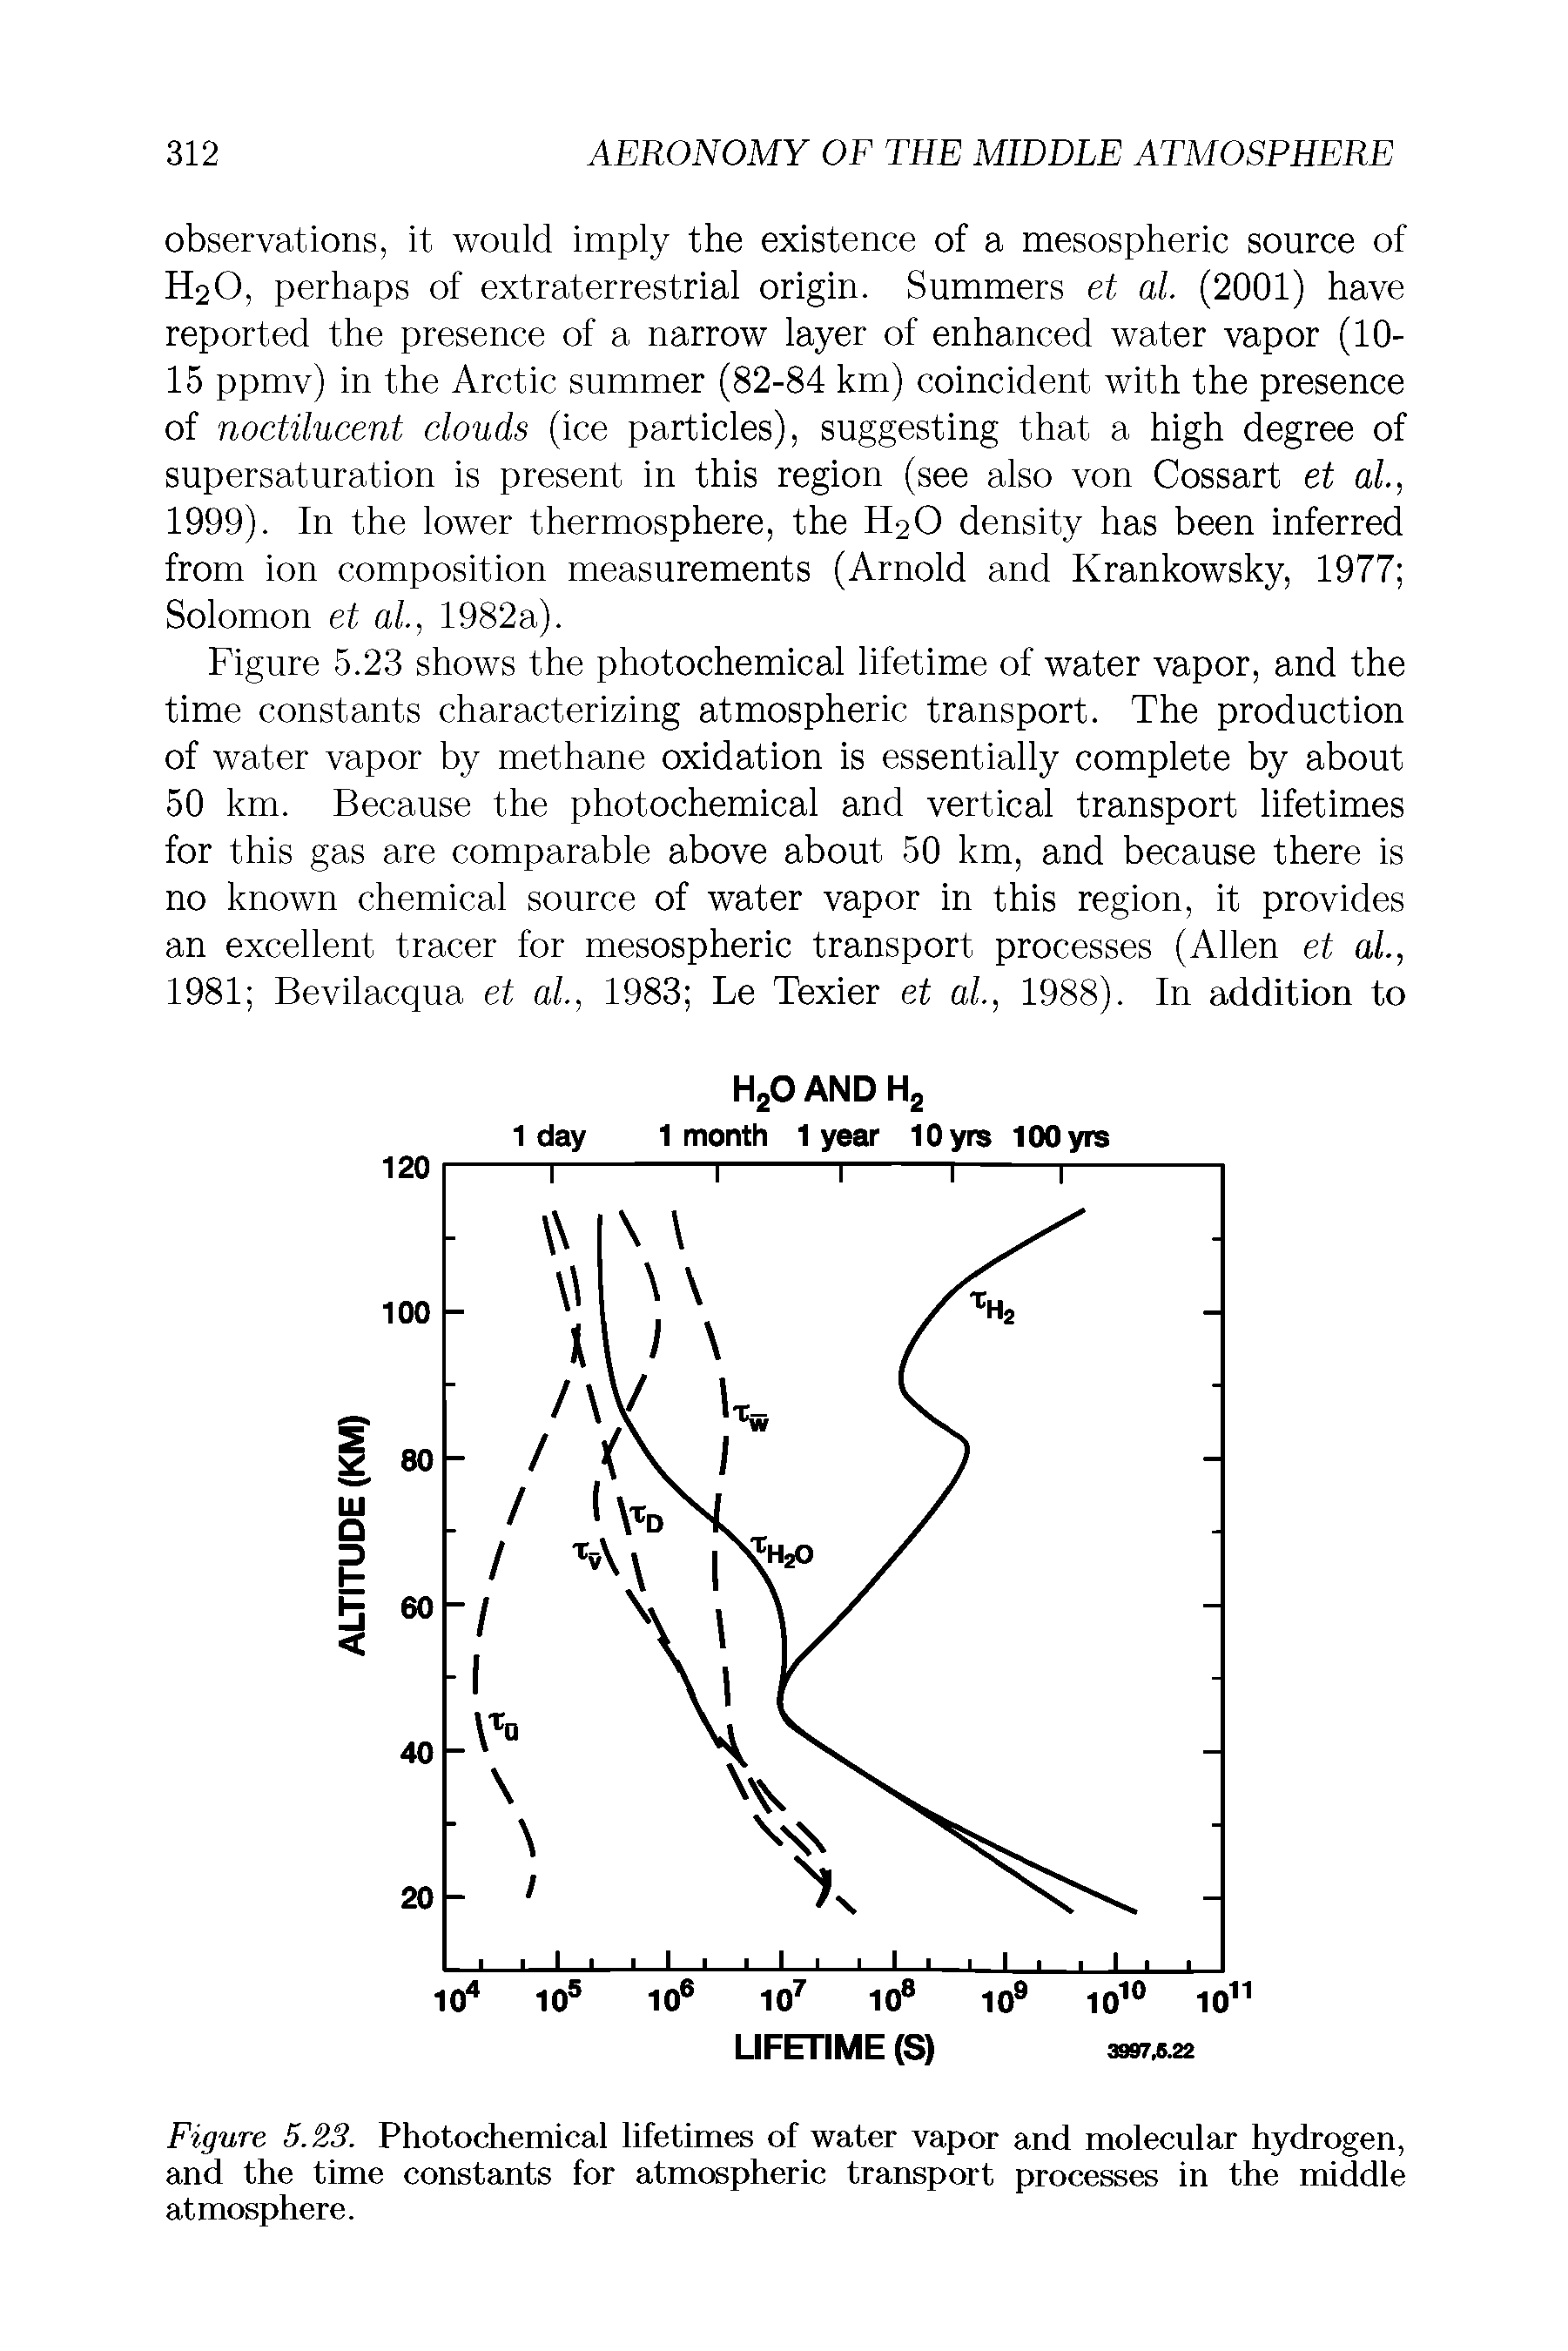 Figure 5.23. Photochemical lifetimes of water vapor and molecular hydrogen, and the time constants for atmospheric transport processes in the middle atmosphere.